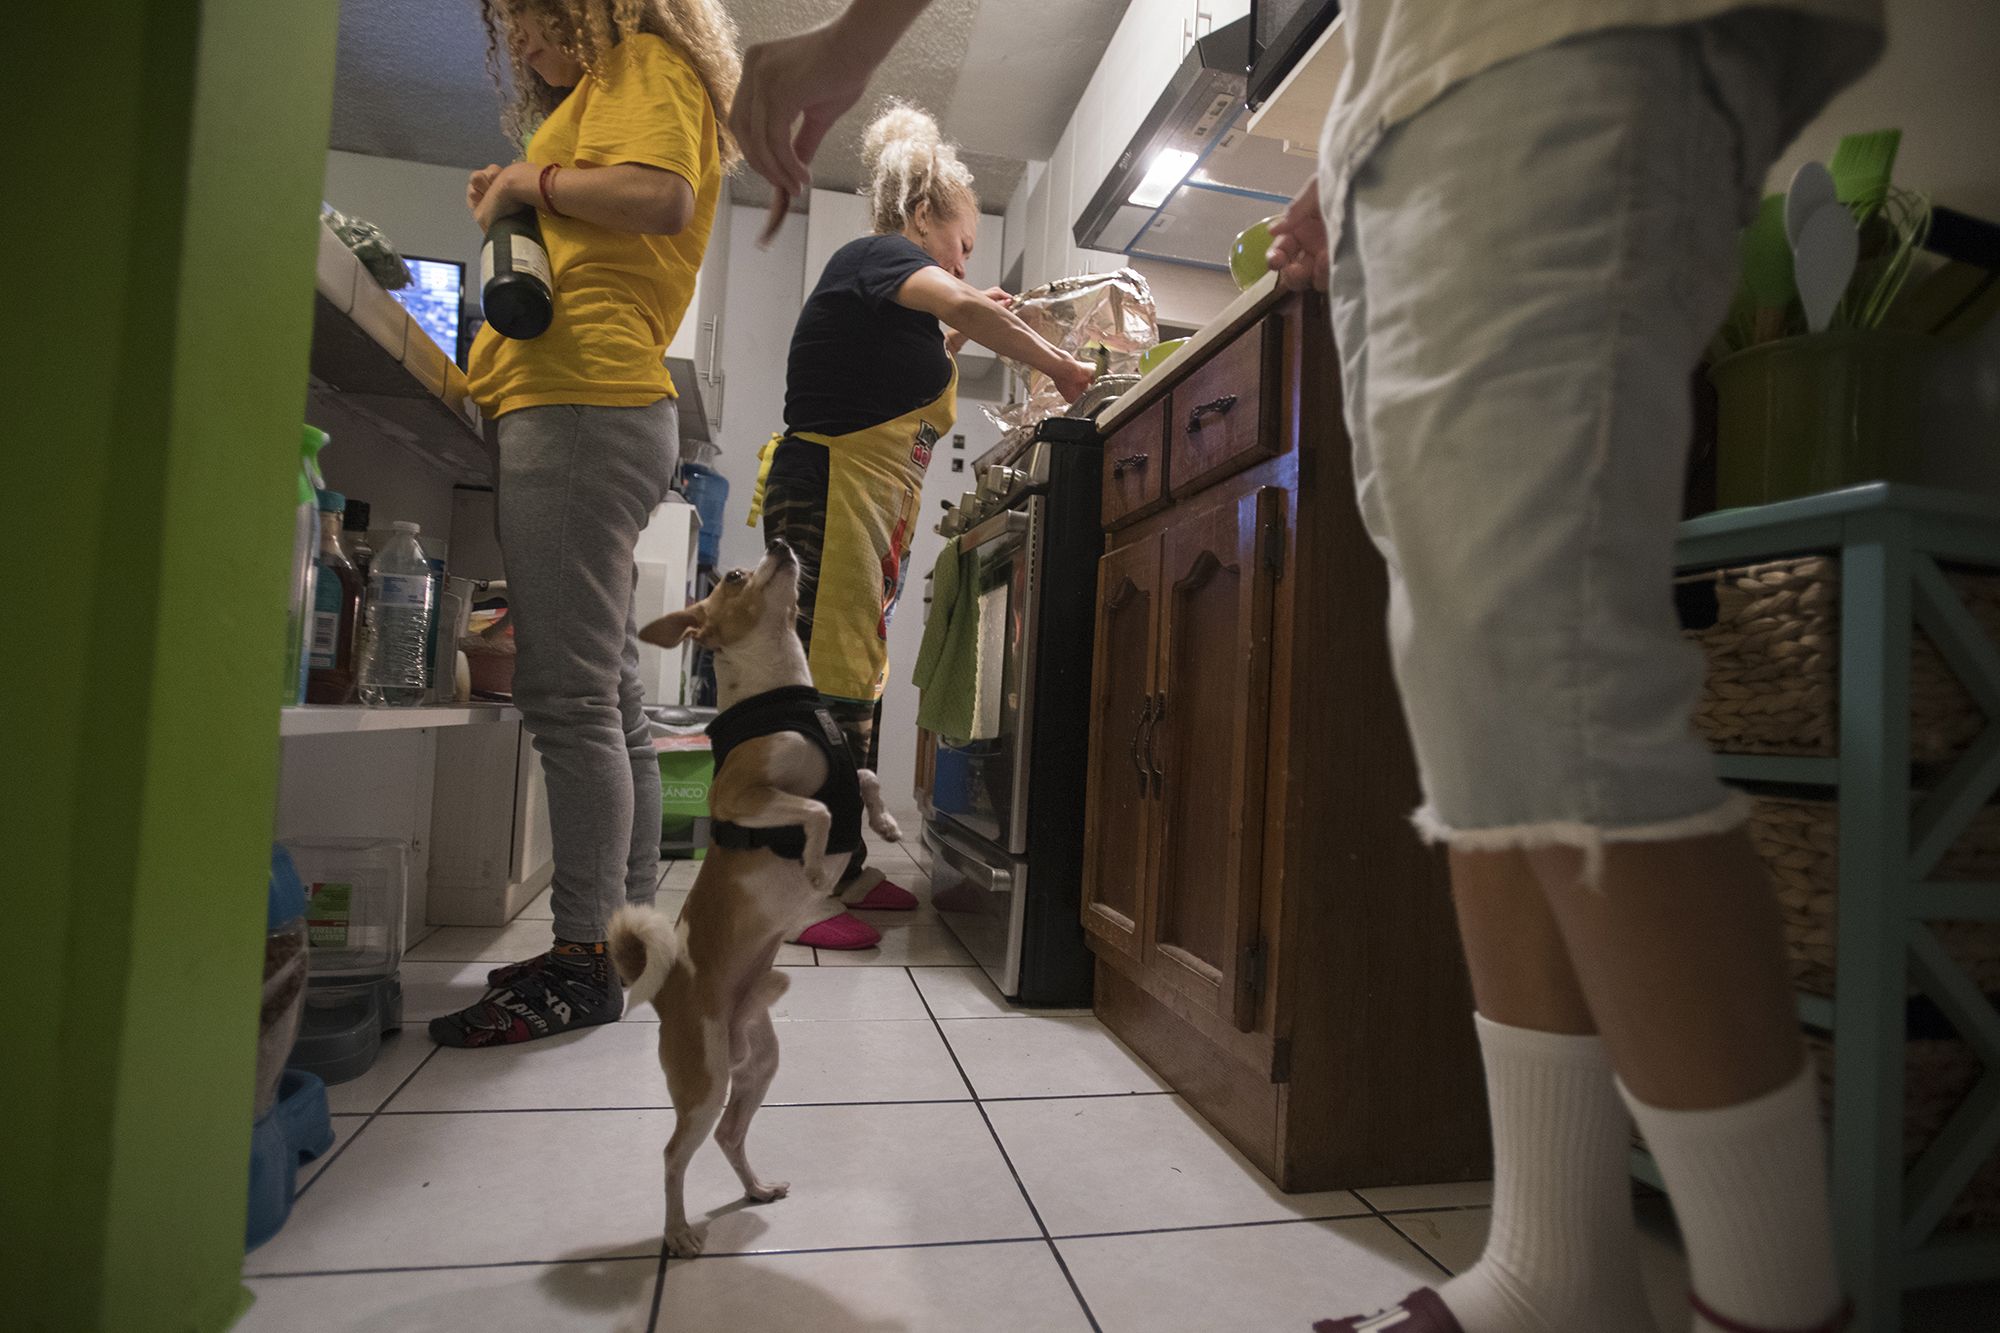 Kennedy Flores helps herself to some sparkling cider while her mother, Enedis, prepares the Thanksgiving feast and family dog, Canelo, gets food scraps from Raymond. Canelo, which means “Cinnamon” in Spanish, is one of two family dogs. Image by Amanda Cowan. Mexico, 2019.